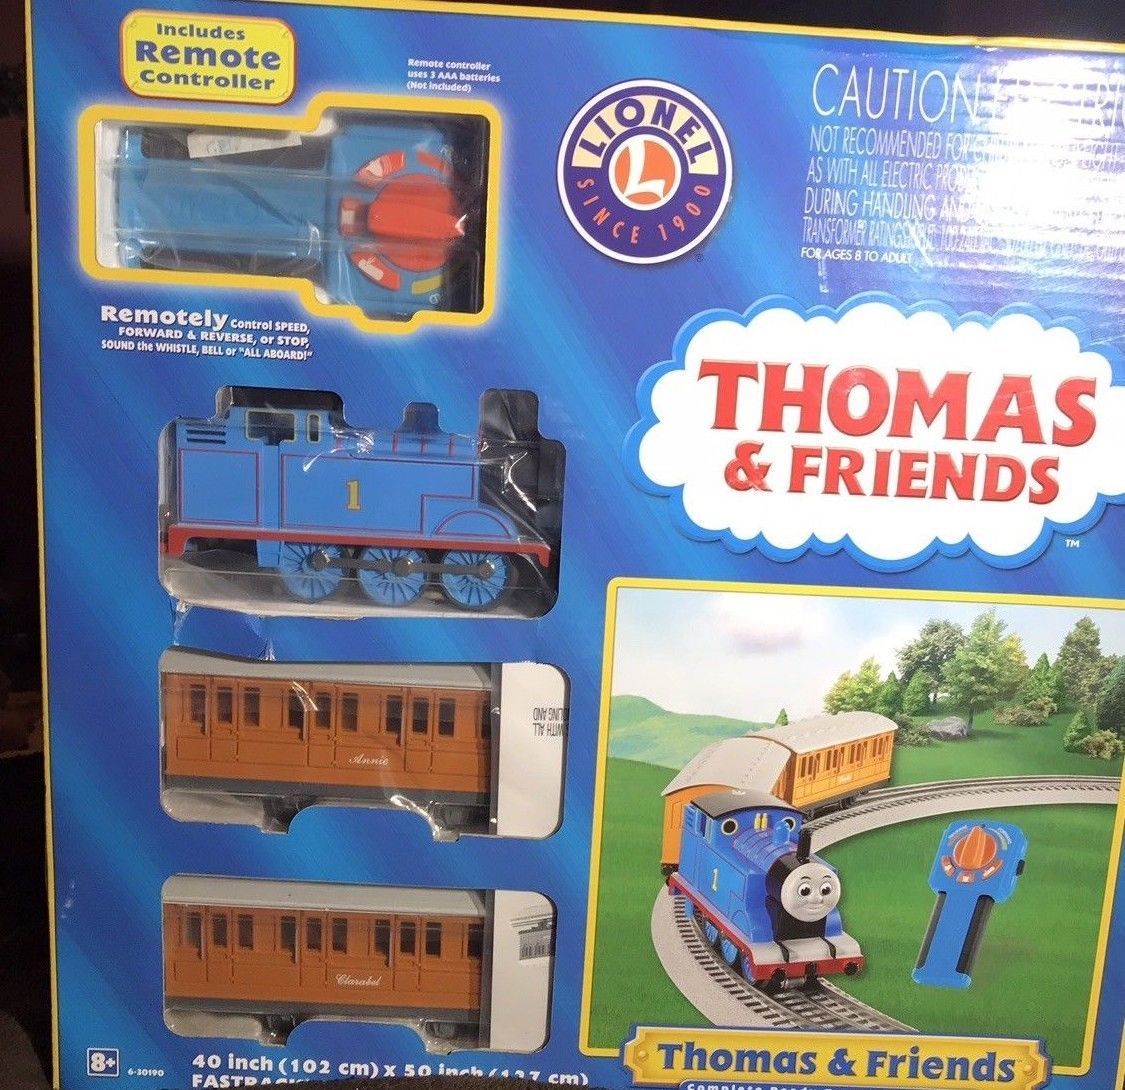 Thomas The Tank and Friends Lionel Complete Ready to Run Remote Train ...